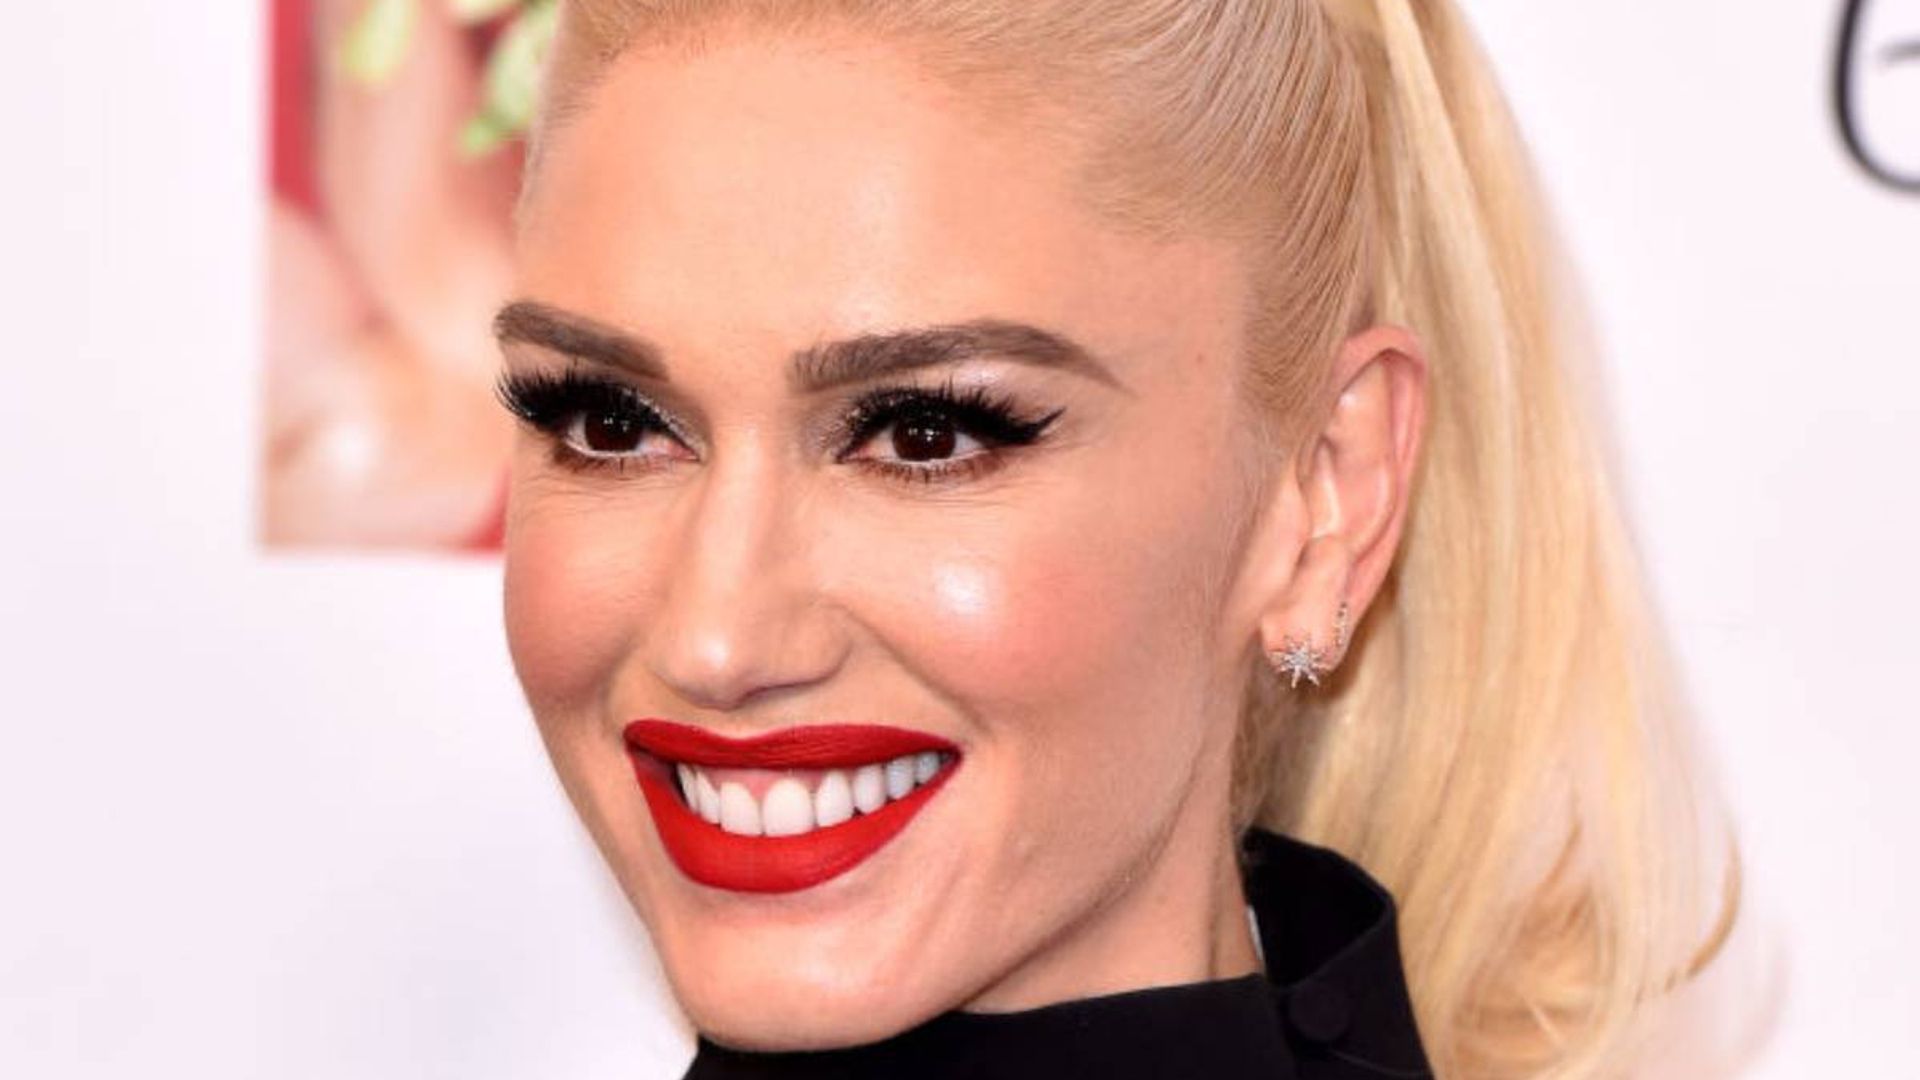 Gwen Stefani's latest appearance sparks concern from fans